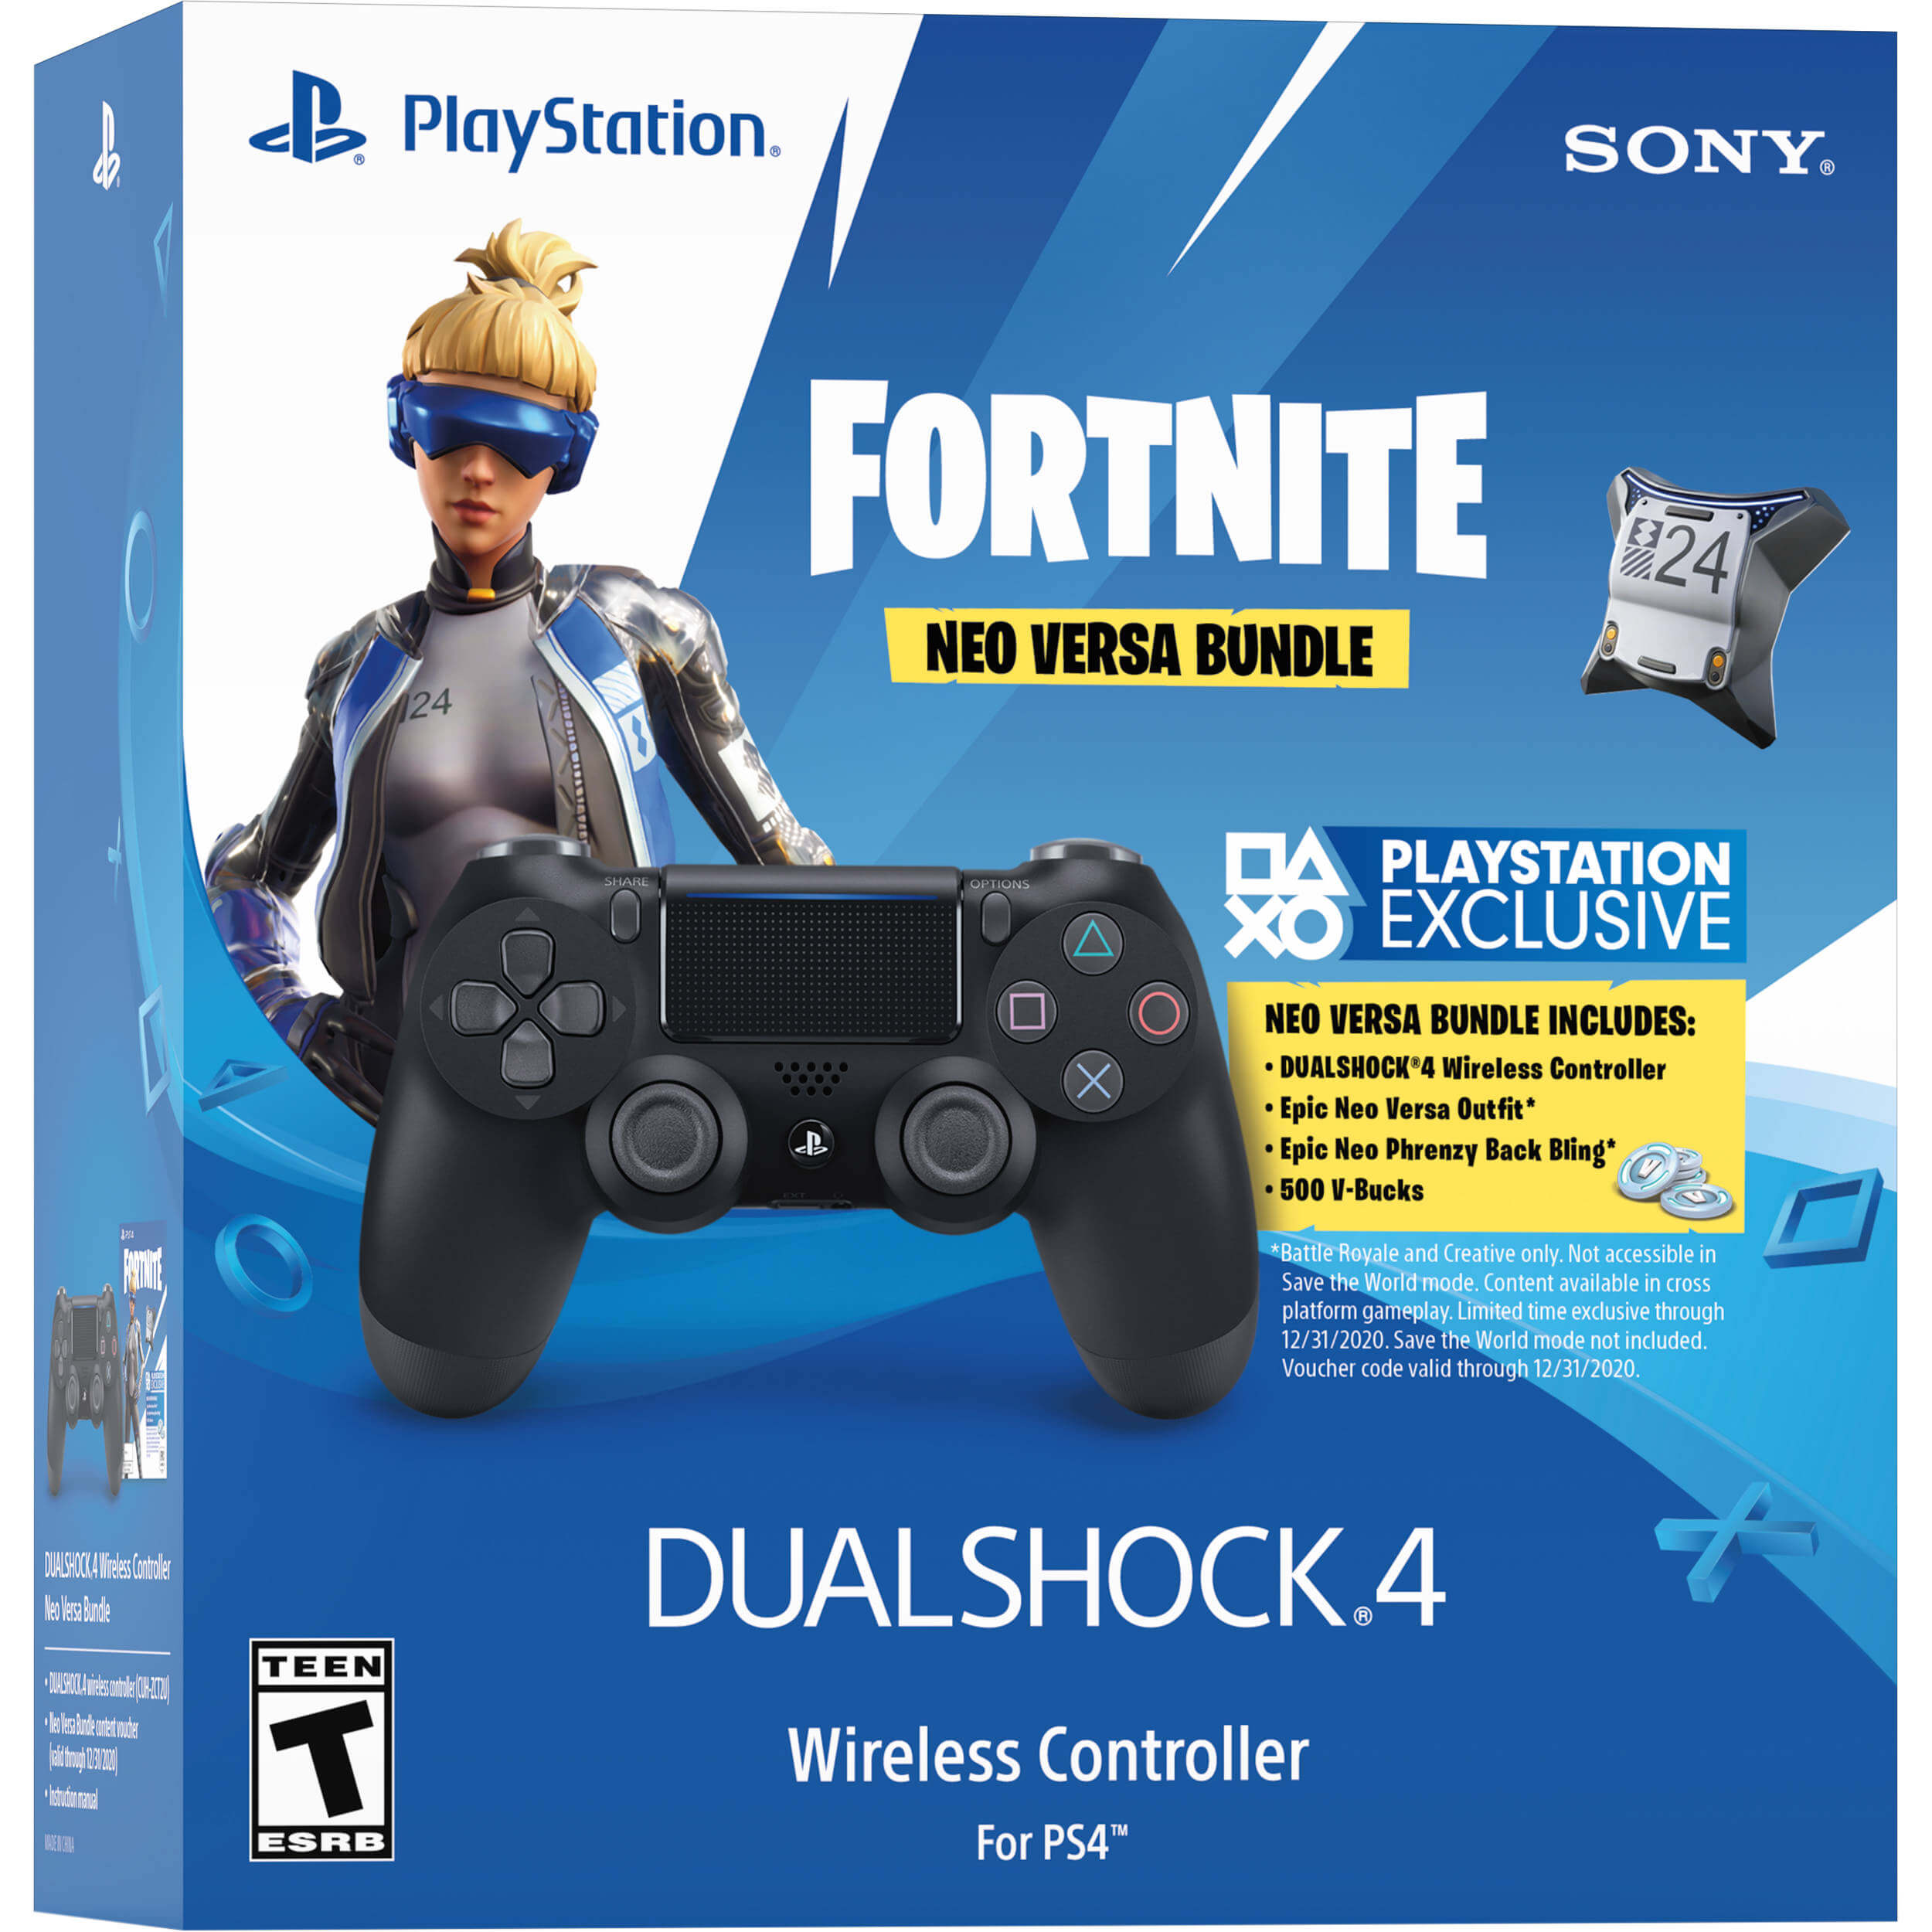 dualshock 4 wireless controller for playstation